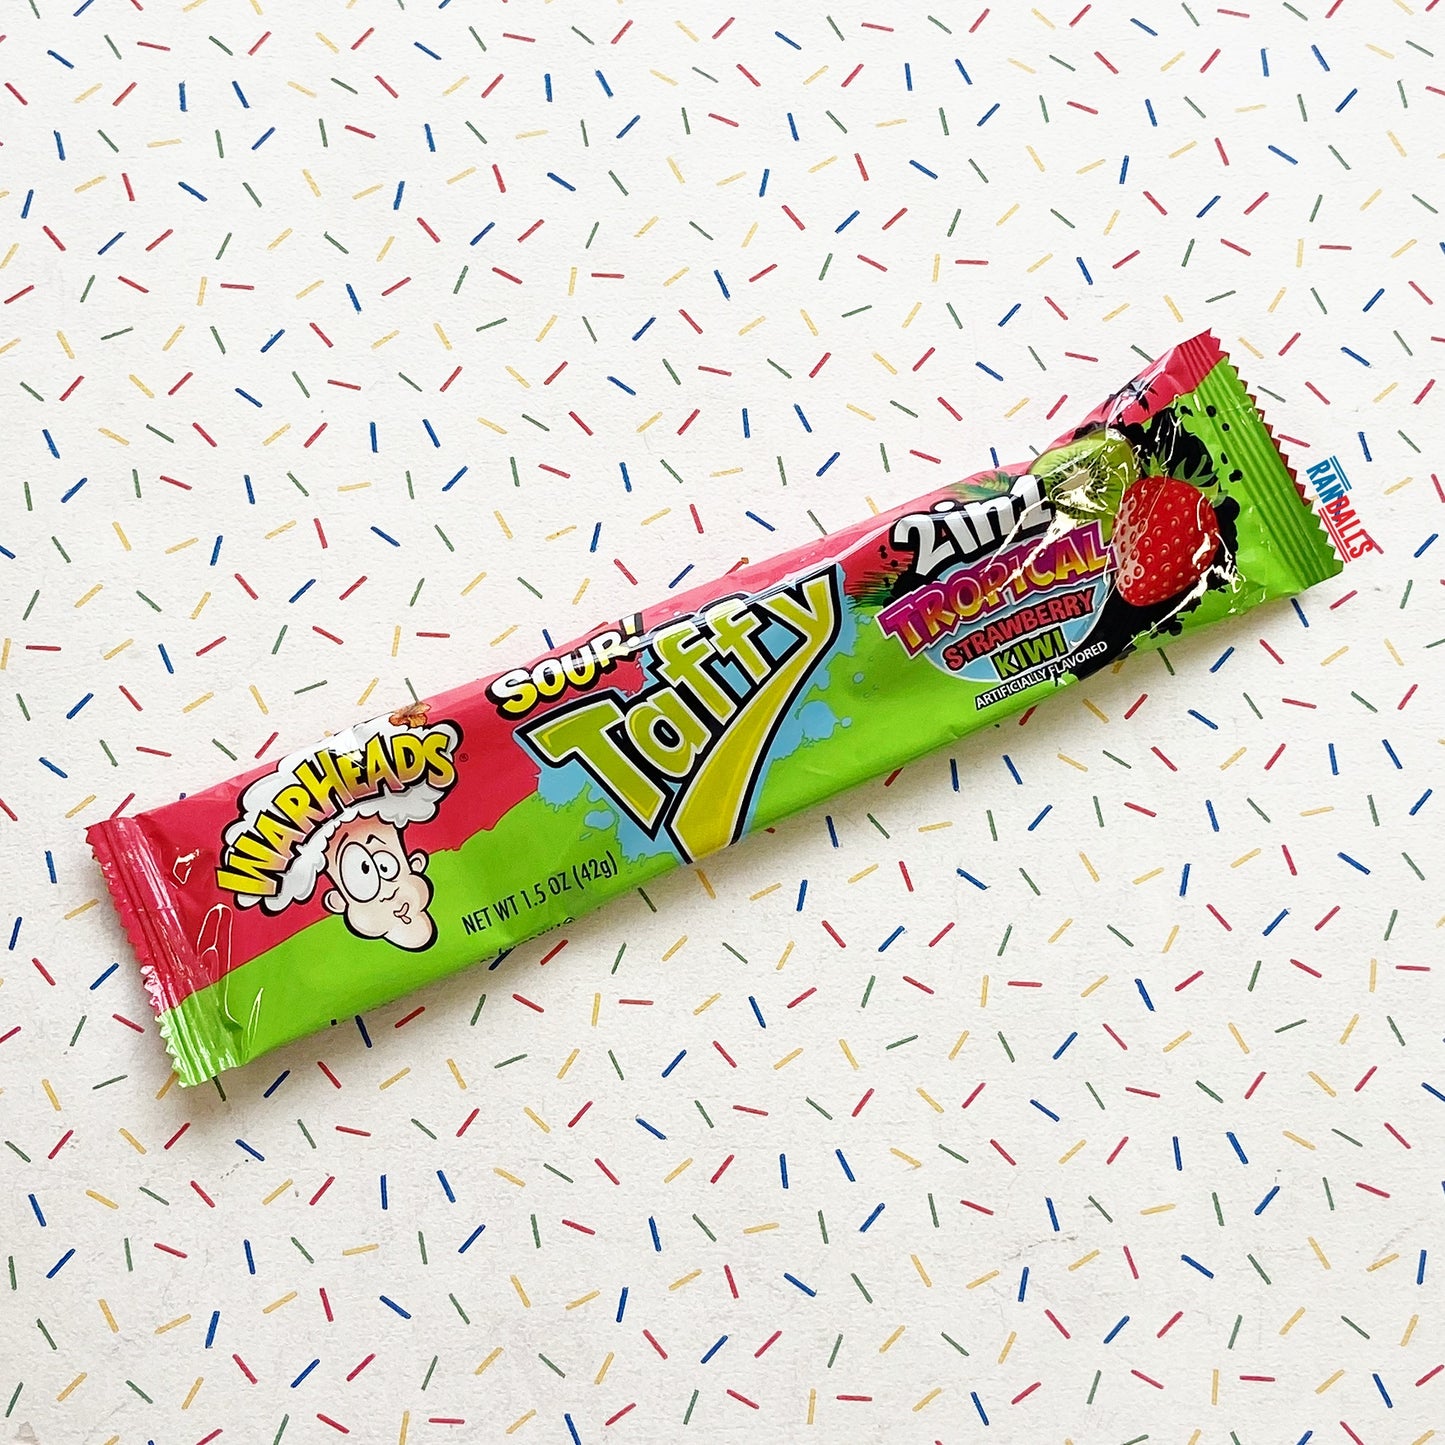 warheads super sour, warheads sour taffy, 2in1 tropical flavours, american candy, tropical candy, strawberry kiwi, pineapple orange, usa, randalls,